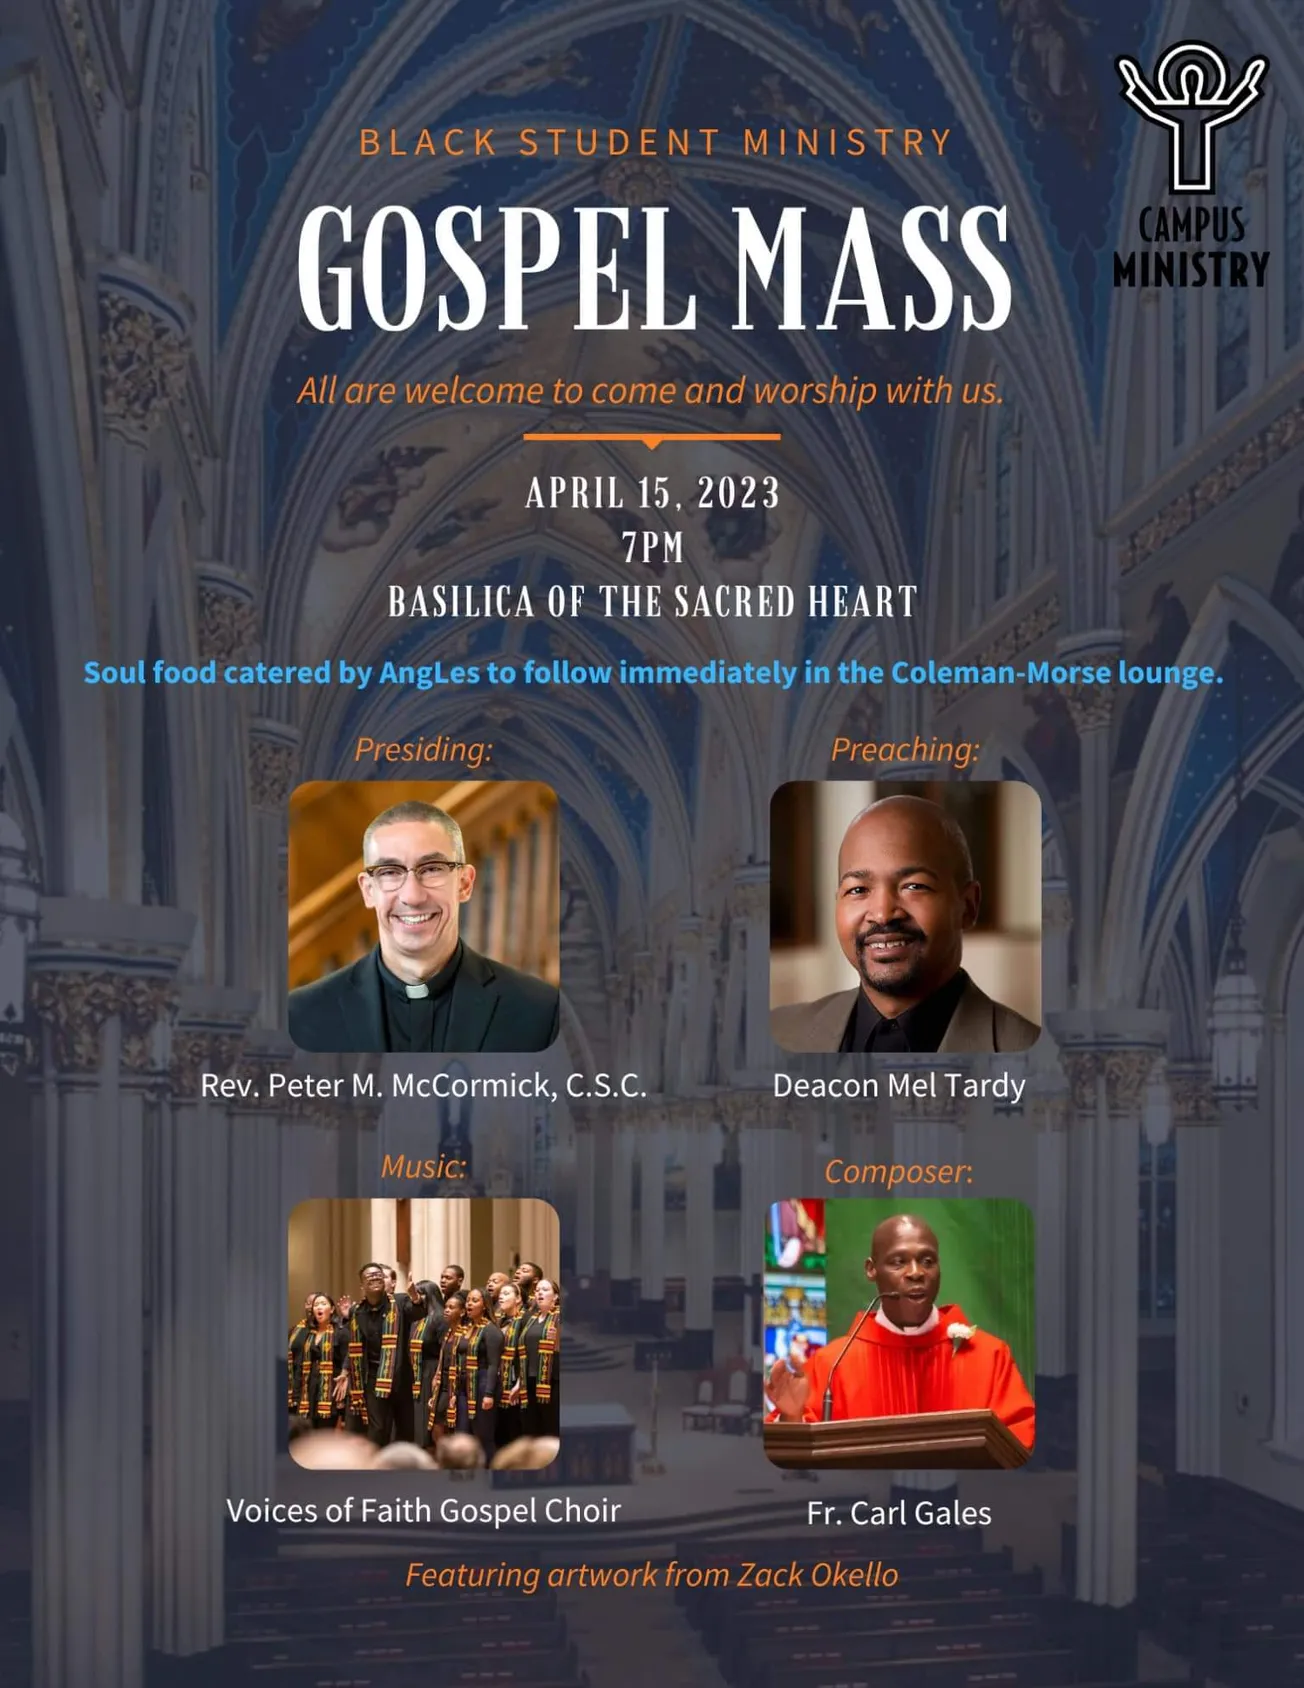 New Gospel Mass premiering Saturday at the University of Notre Dame